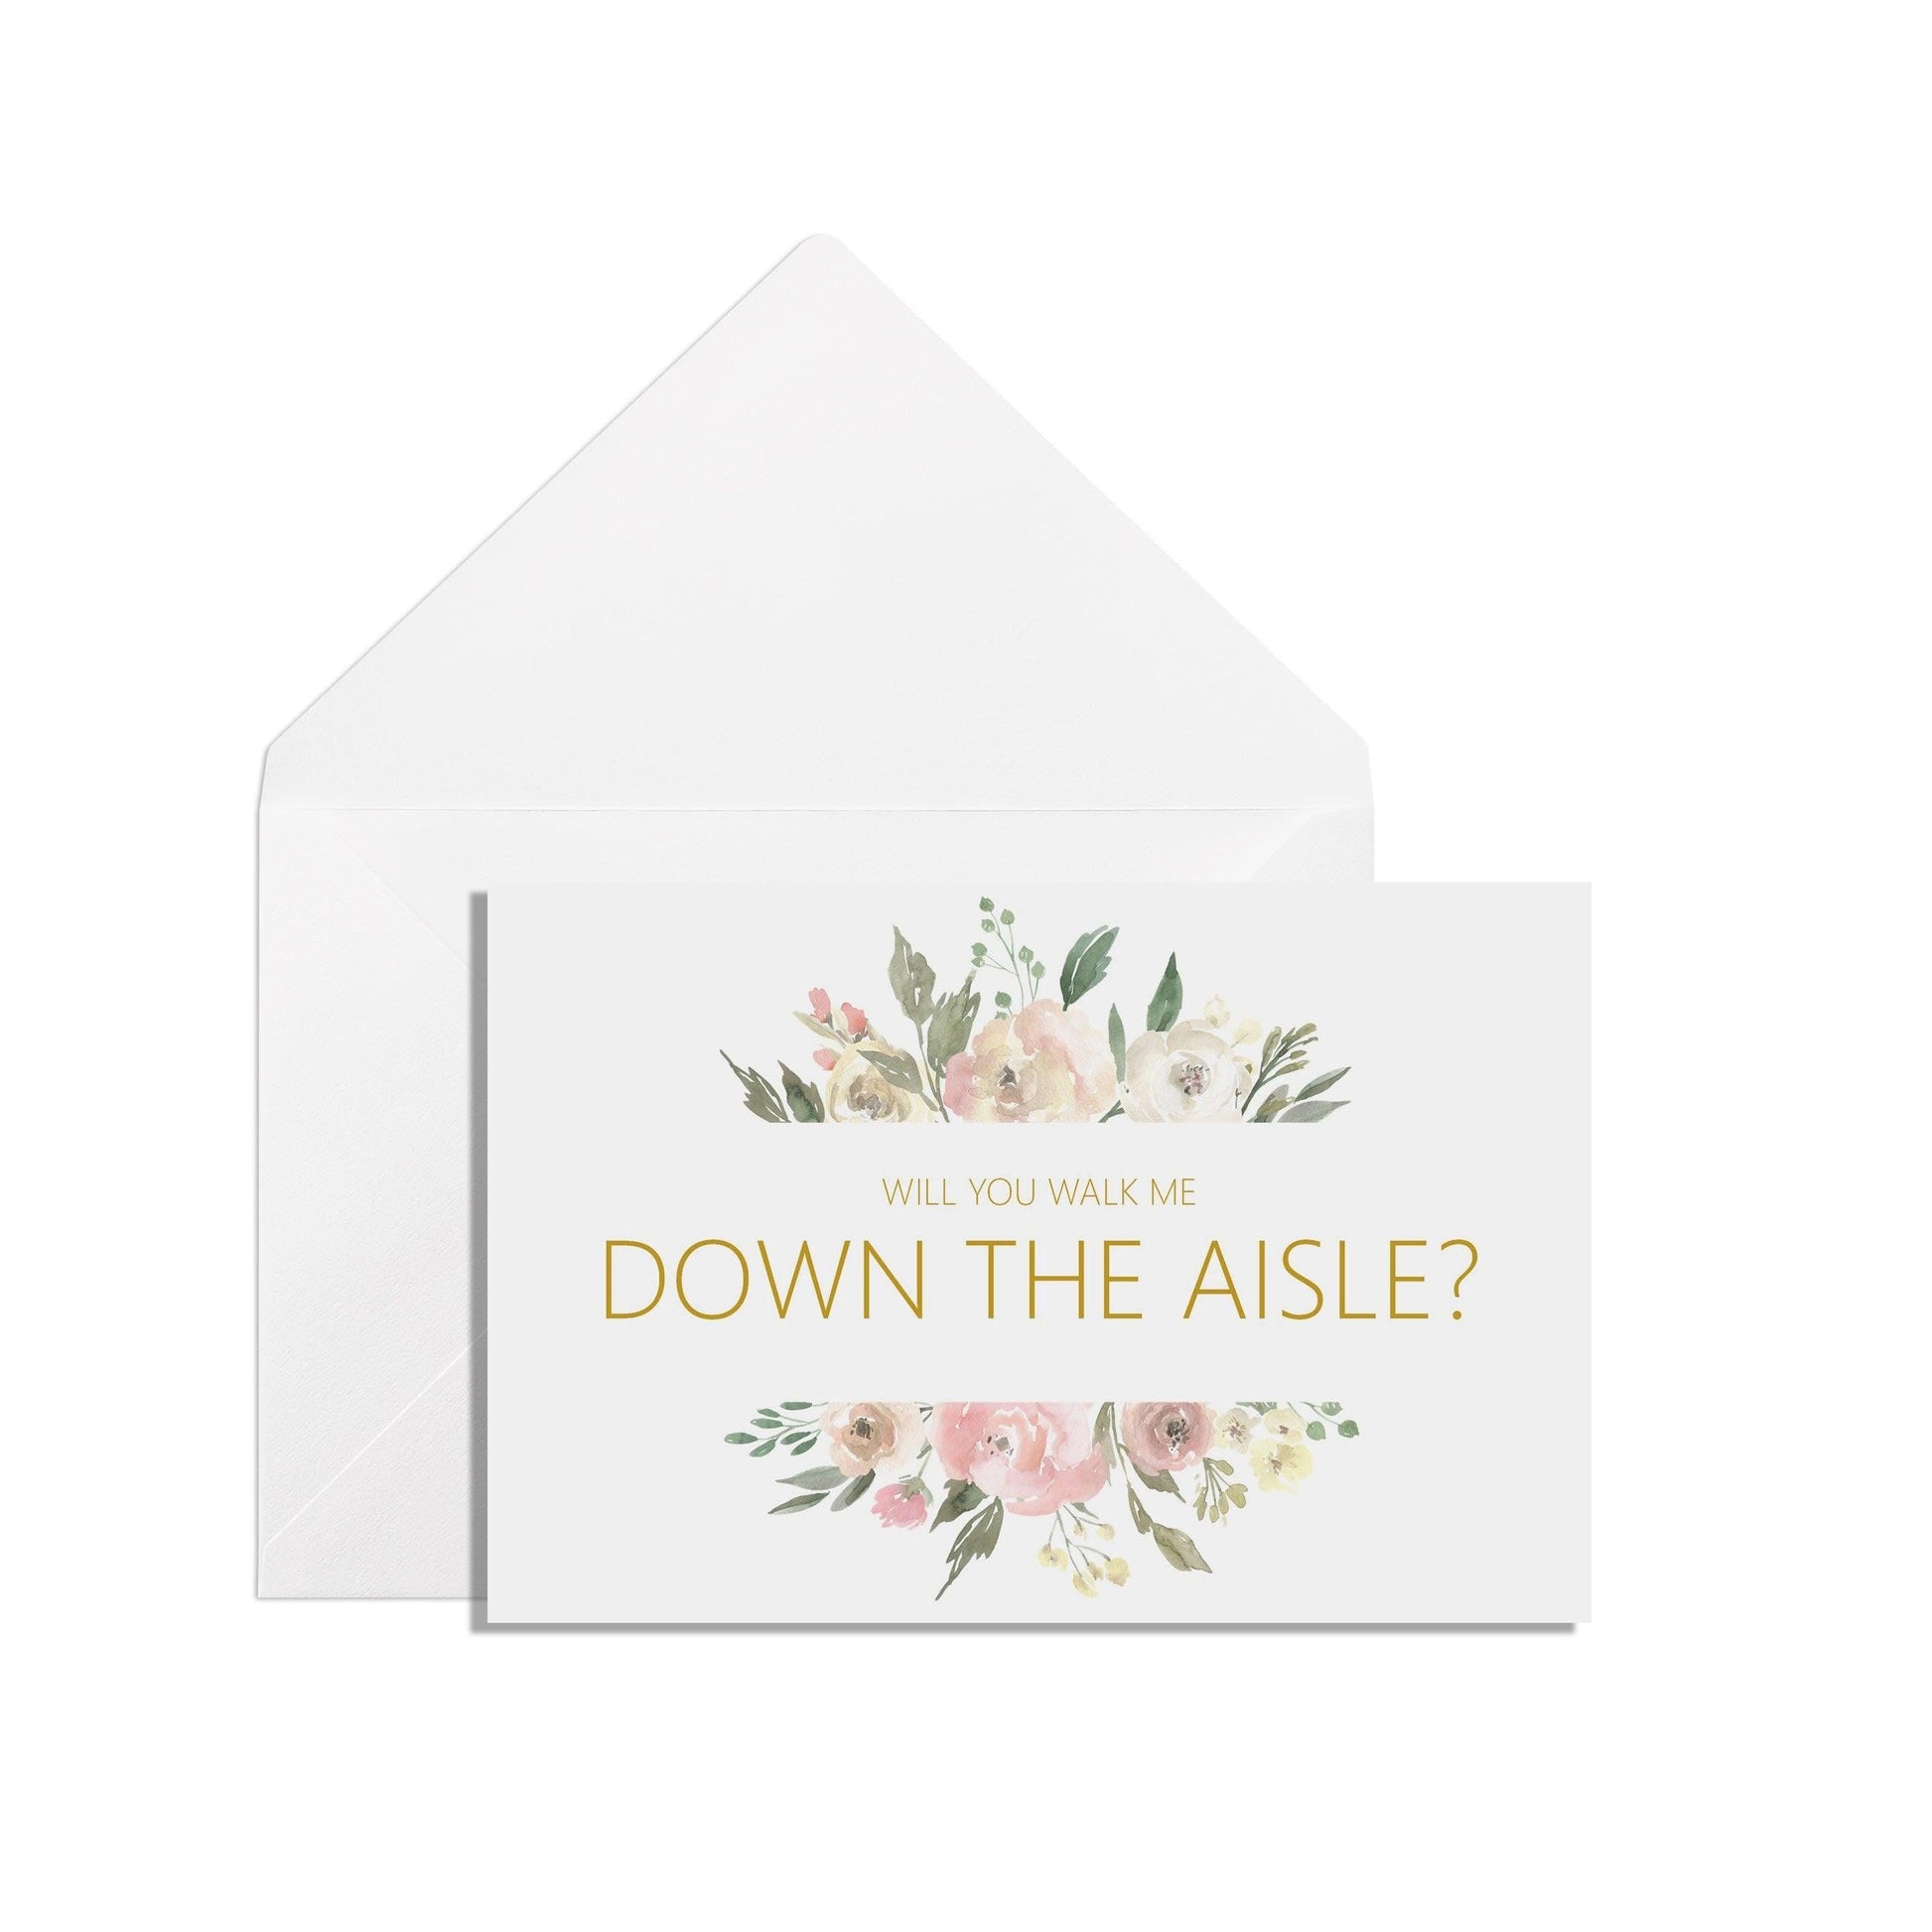  Will You Walk Me Down The Aisle? A6 Blush Floral Proposal Card With White Envelope by PMPRINTED 